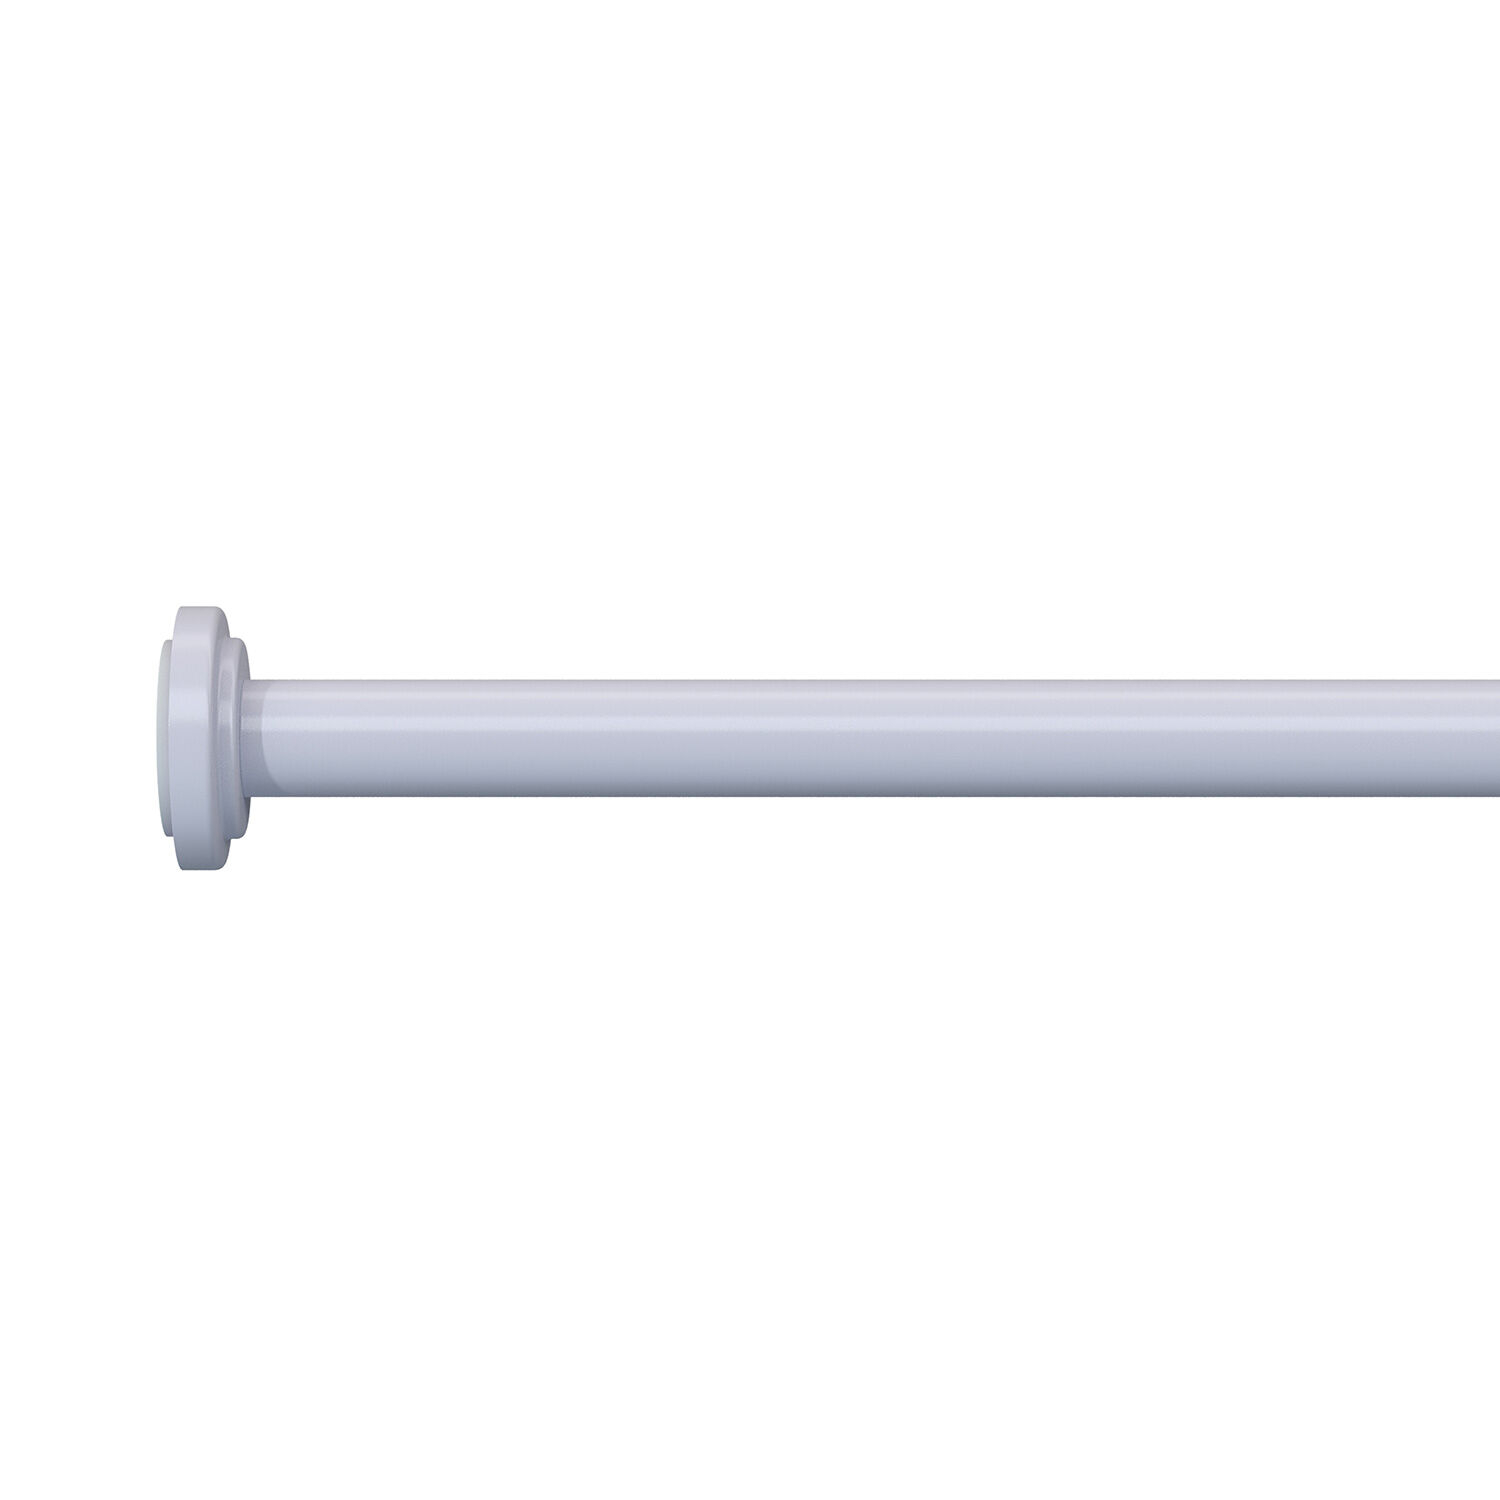 Extendable Tension Rod 25mm - Home Store + More